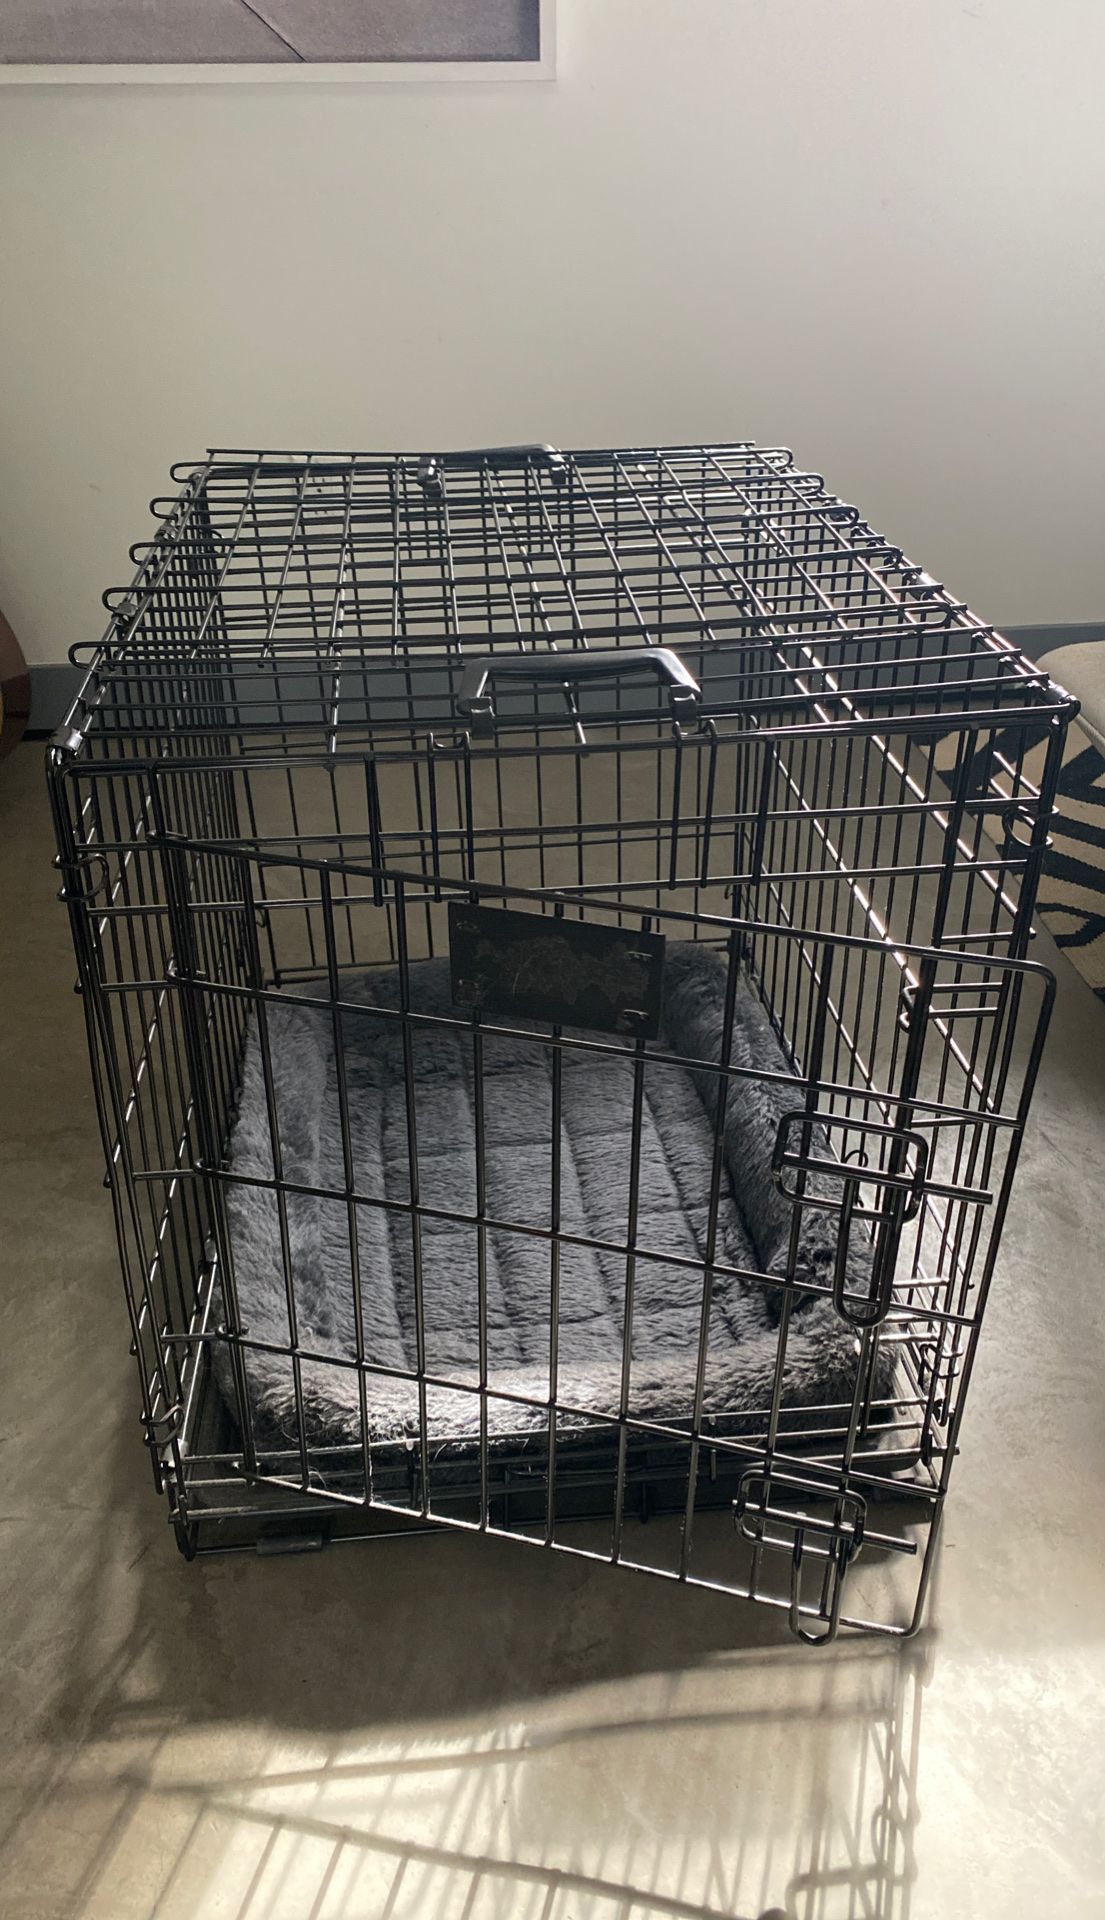 Small / Medium sized dog crate and liner bed